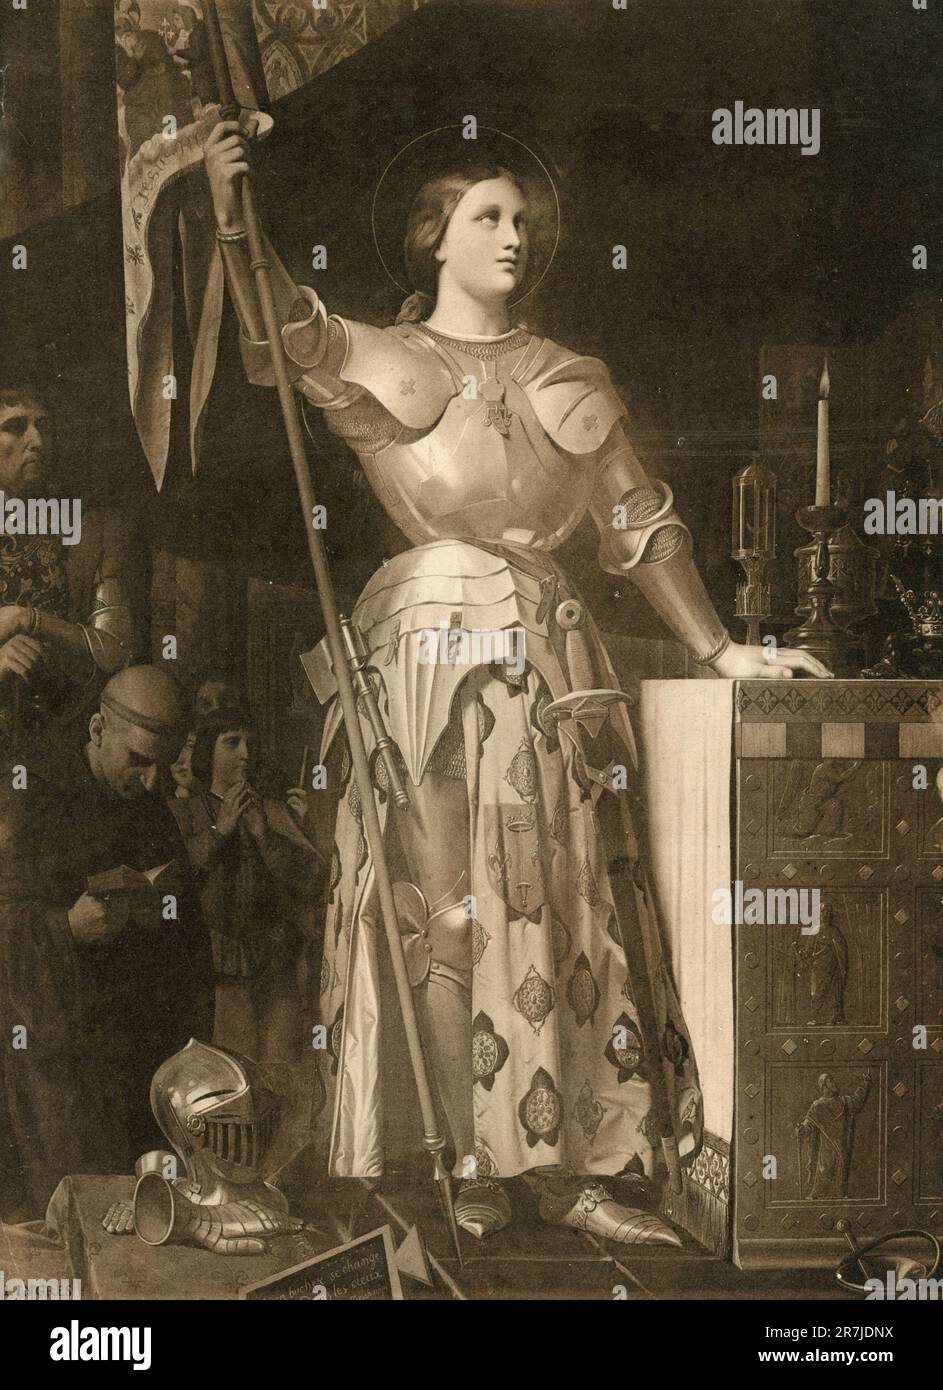 Joan of Arc (1412-1431) on the Bucher in Rouen Painting by Jules Lenepveu  (1819-1898) 1889. Paris, Pantheon - Joan of Arc (1412-1431) at the Stake in